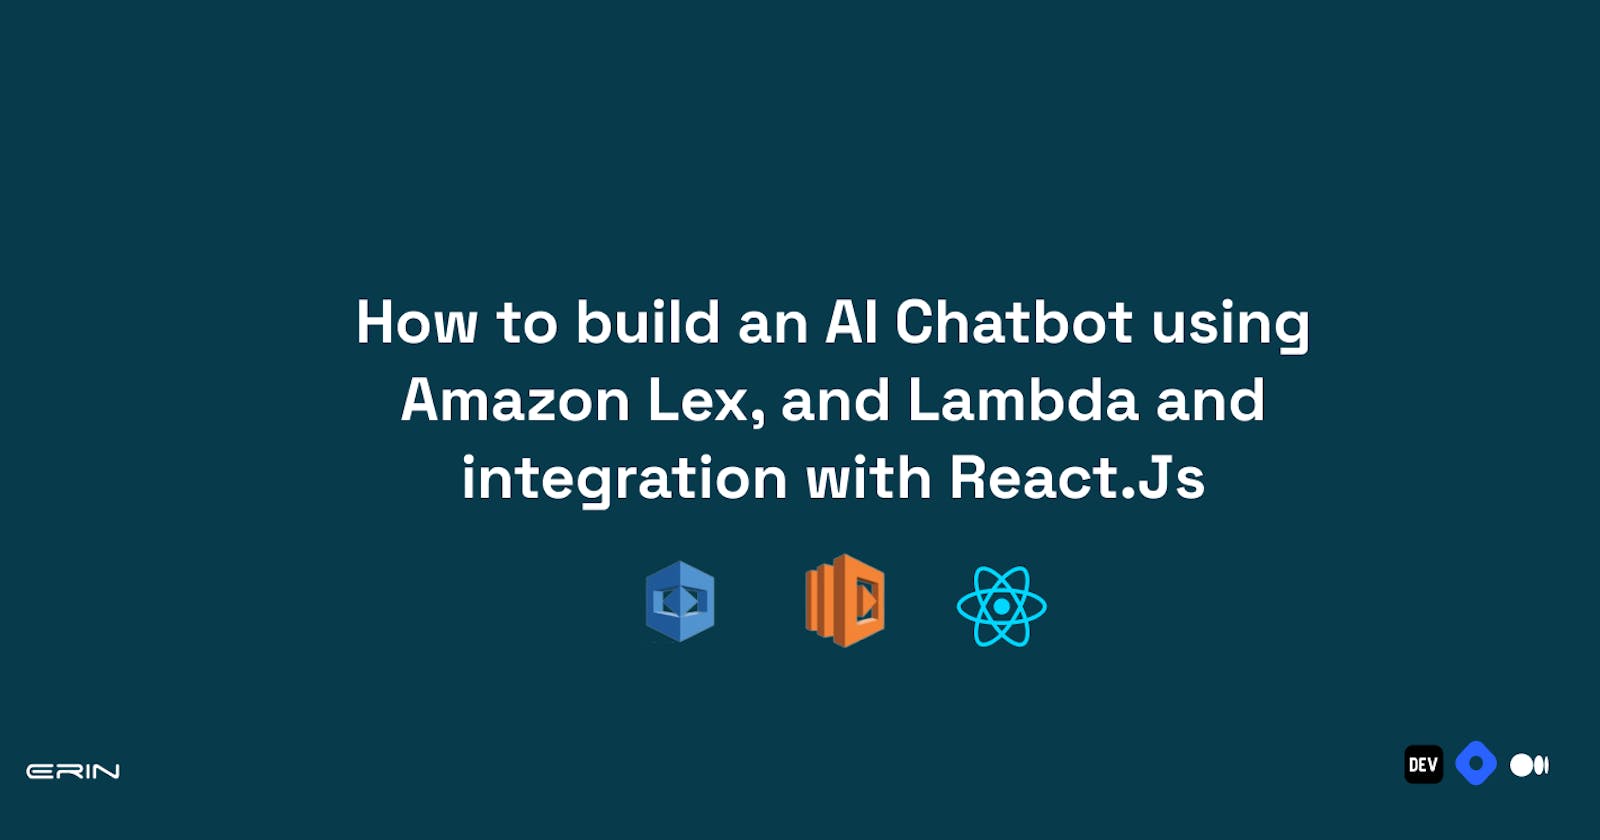 How to build an AI Chatbot using Amazon Lex and Lambda, and Integration with ReactJS